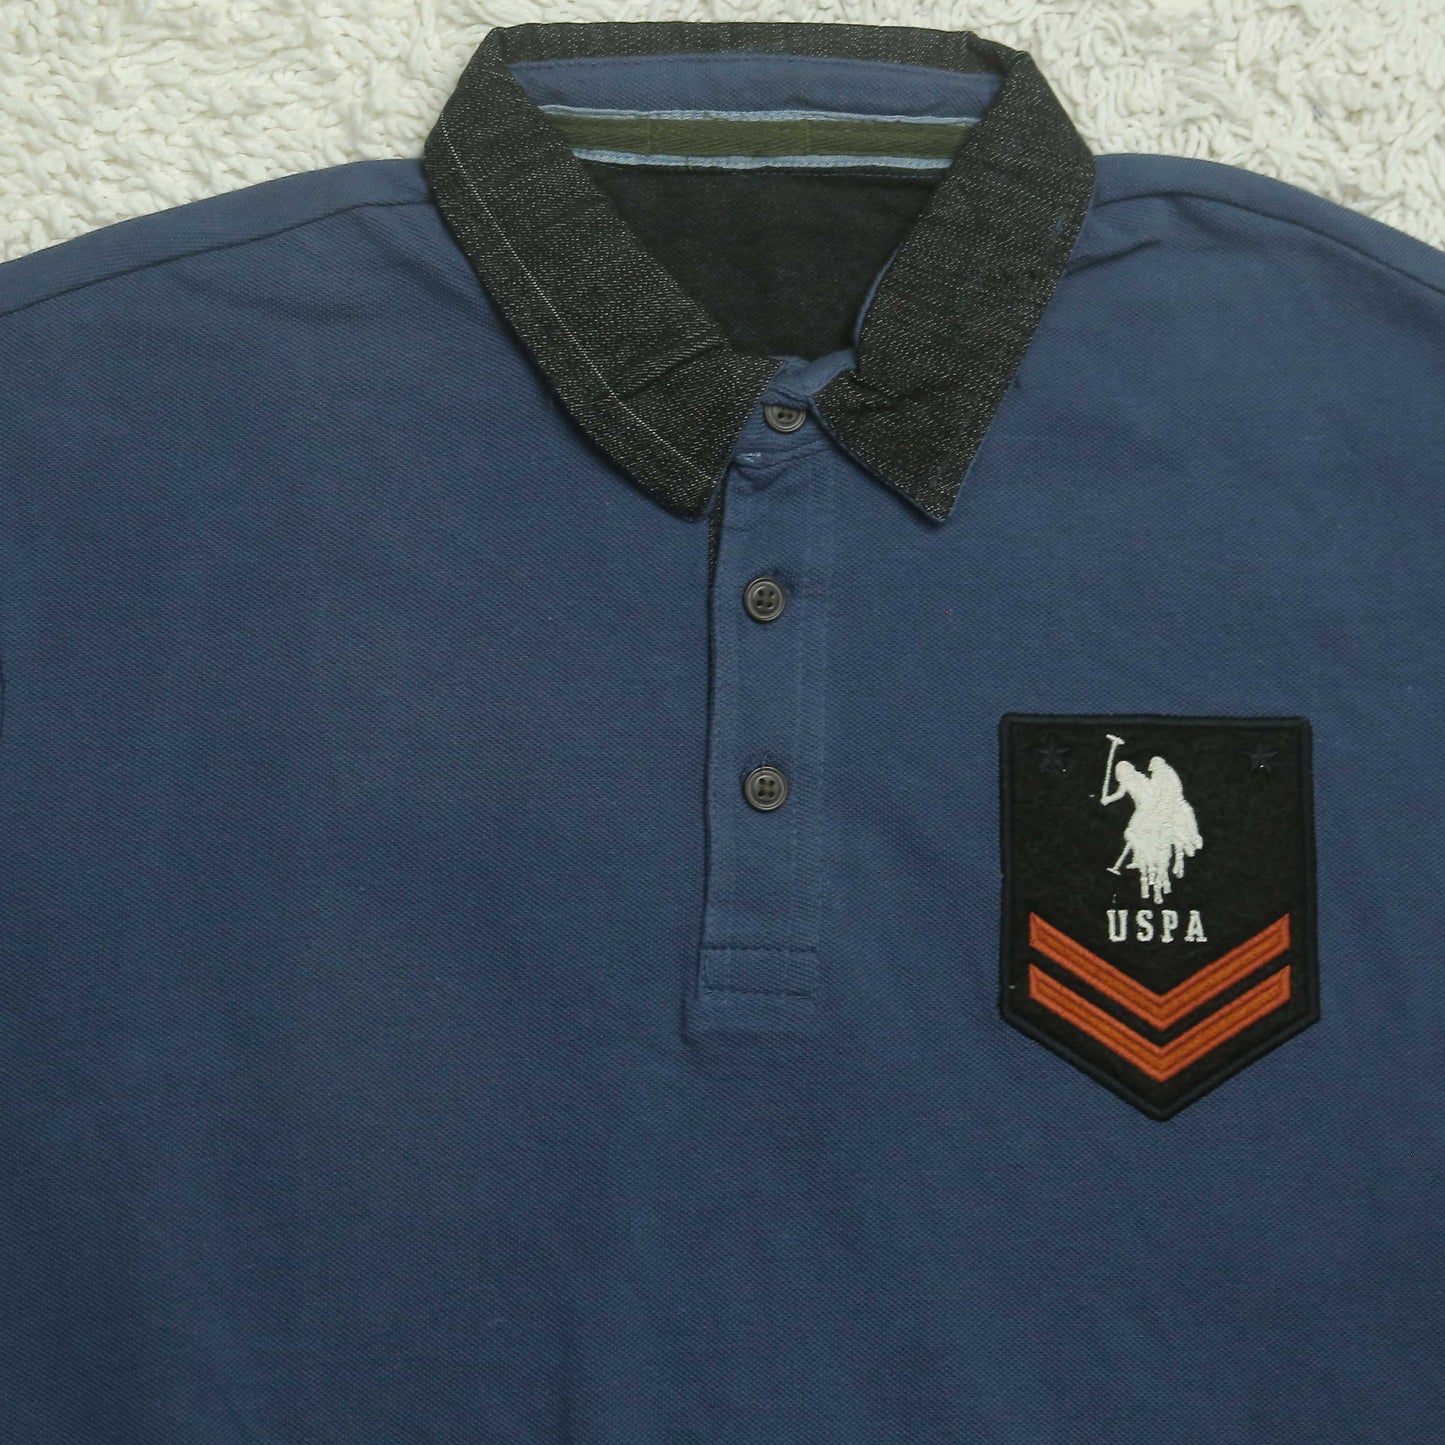 (MINOR FAULT) Uspa - Polo (Men) Blue With Black Bottom & Embroidered Logo - T-Shirt